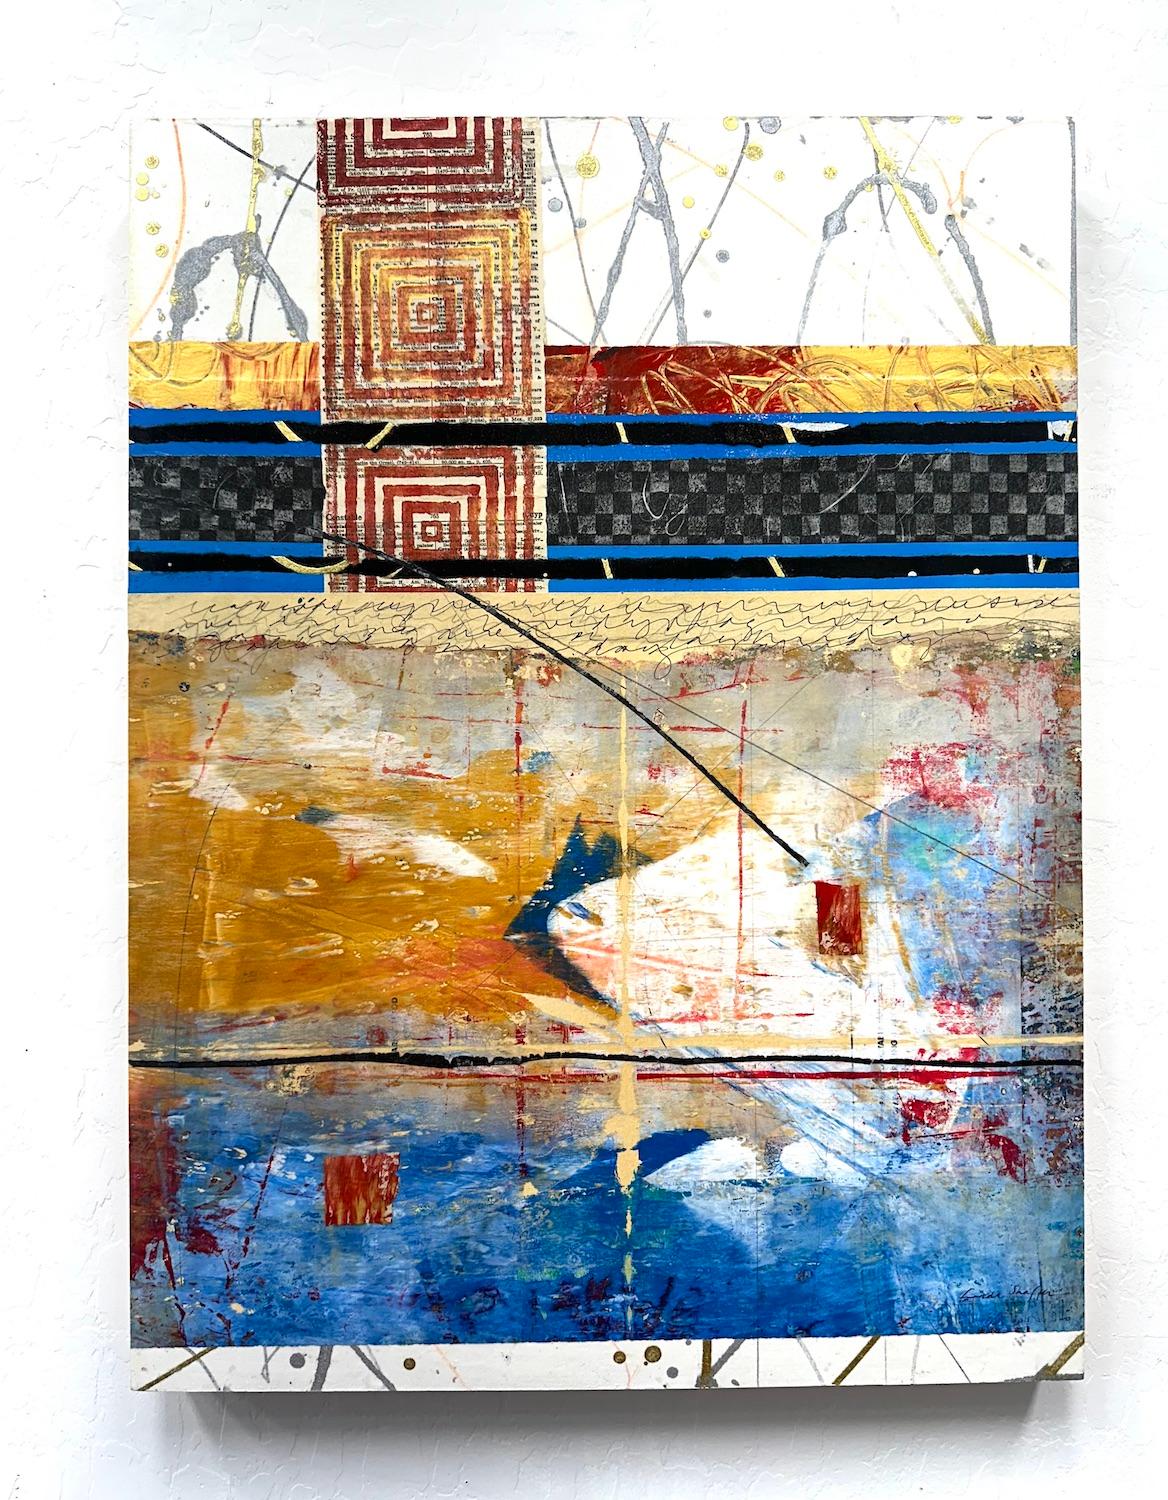 <p>Artist Comments<br>Artist Linda Shaffer captures the beauty and tranquility of the sunrise in her mixed-media abstract piece. She uses a combination of paints, paper, and graphite to convey her message through a captivating visual experience that